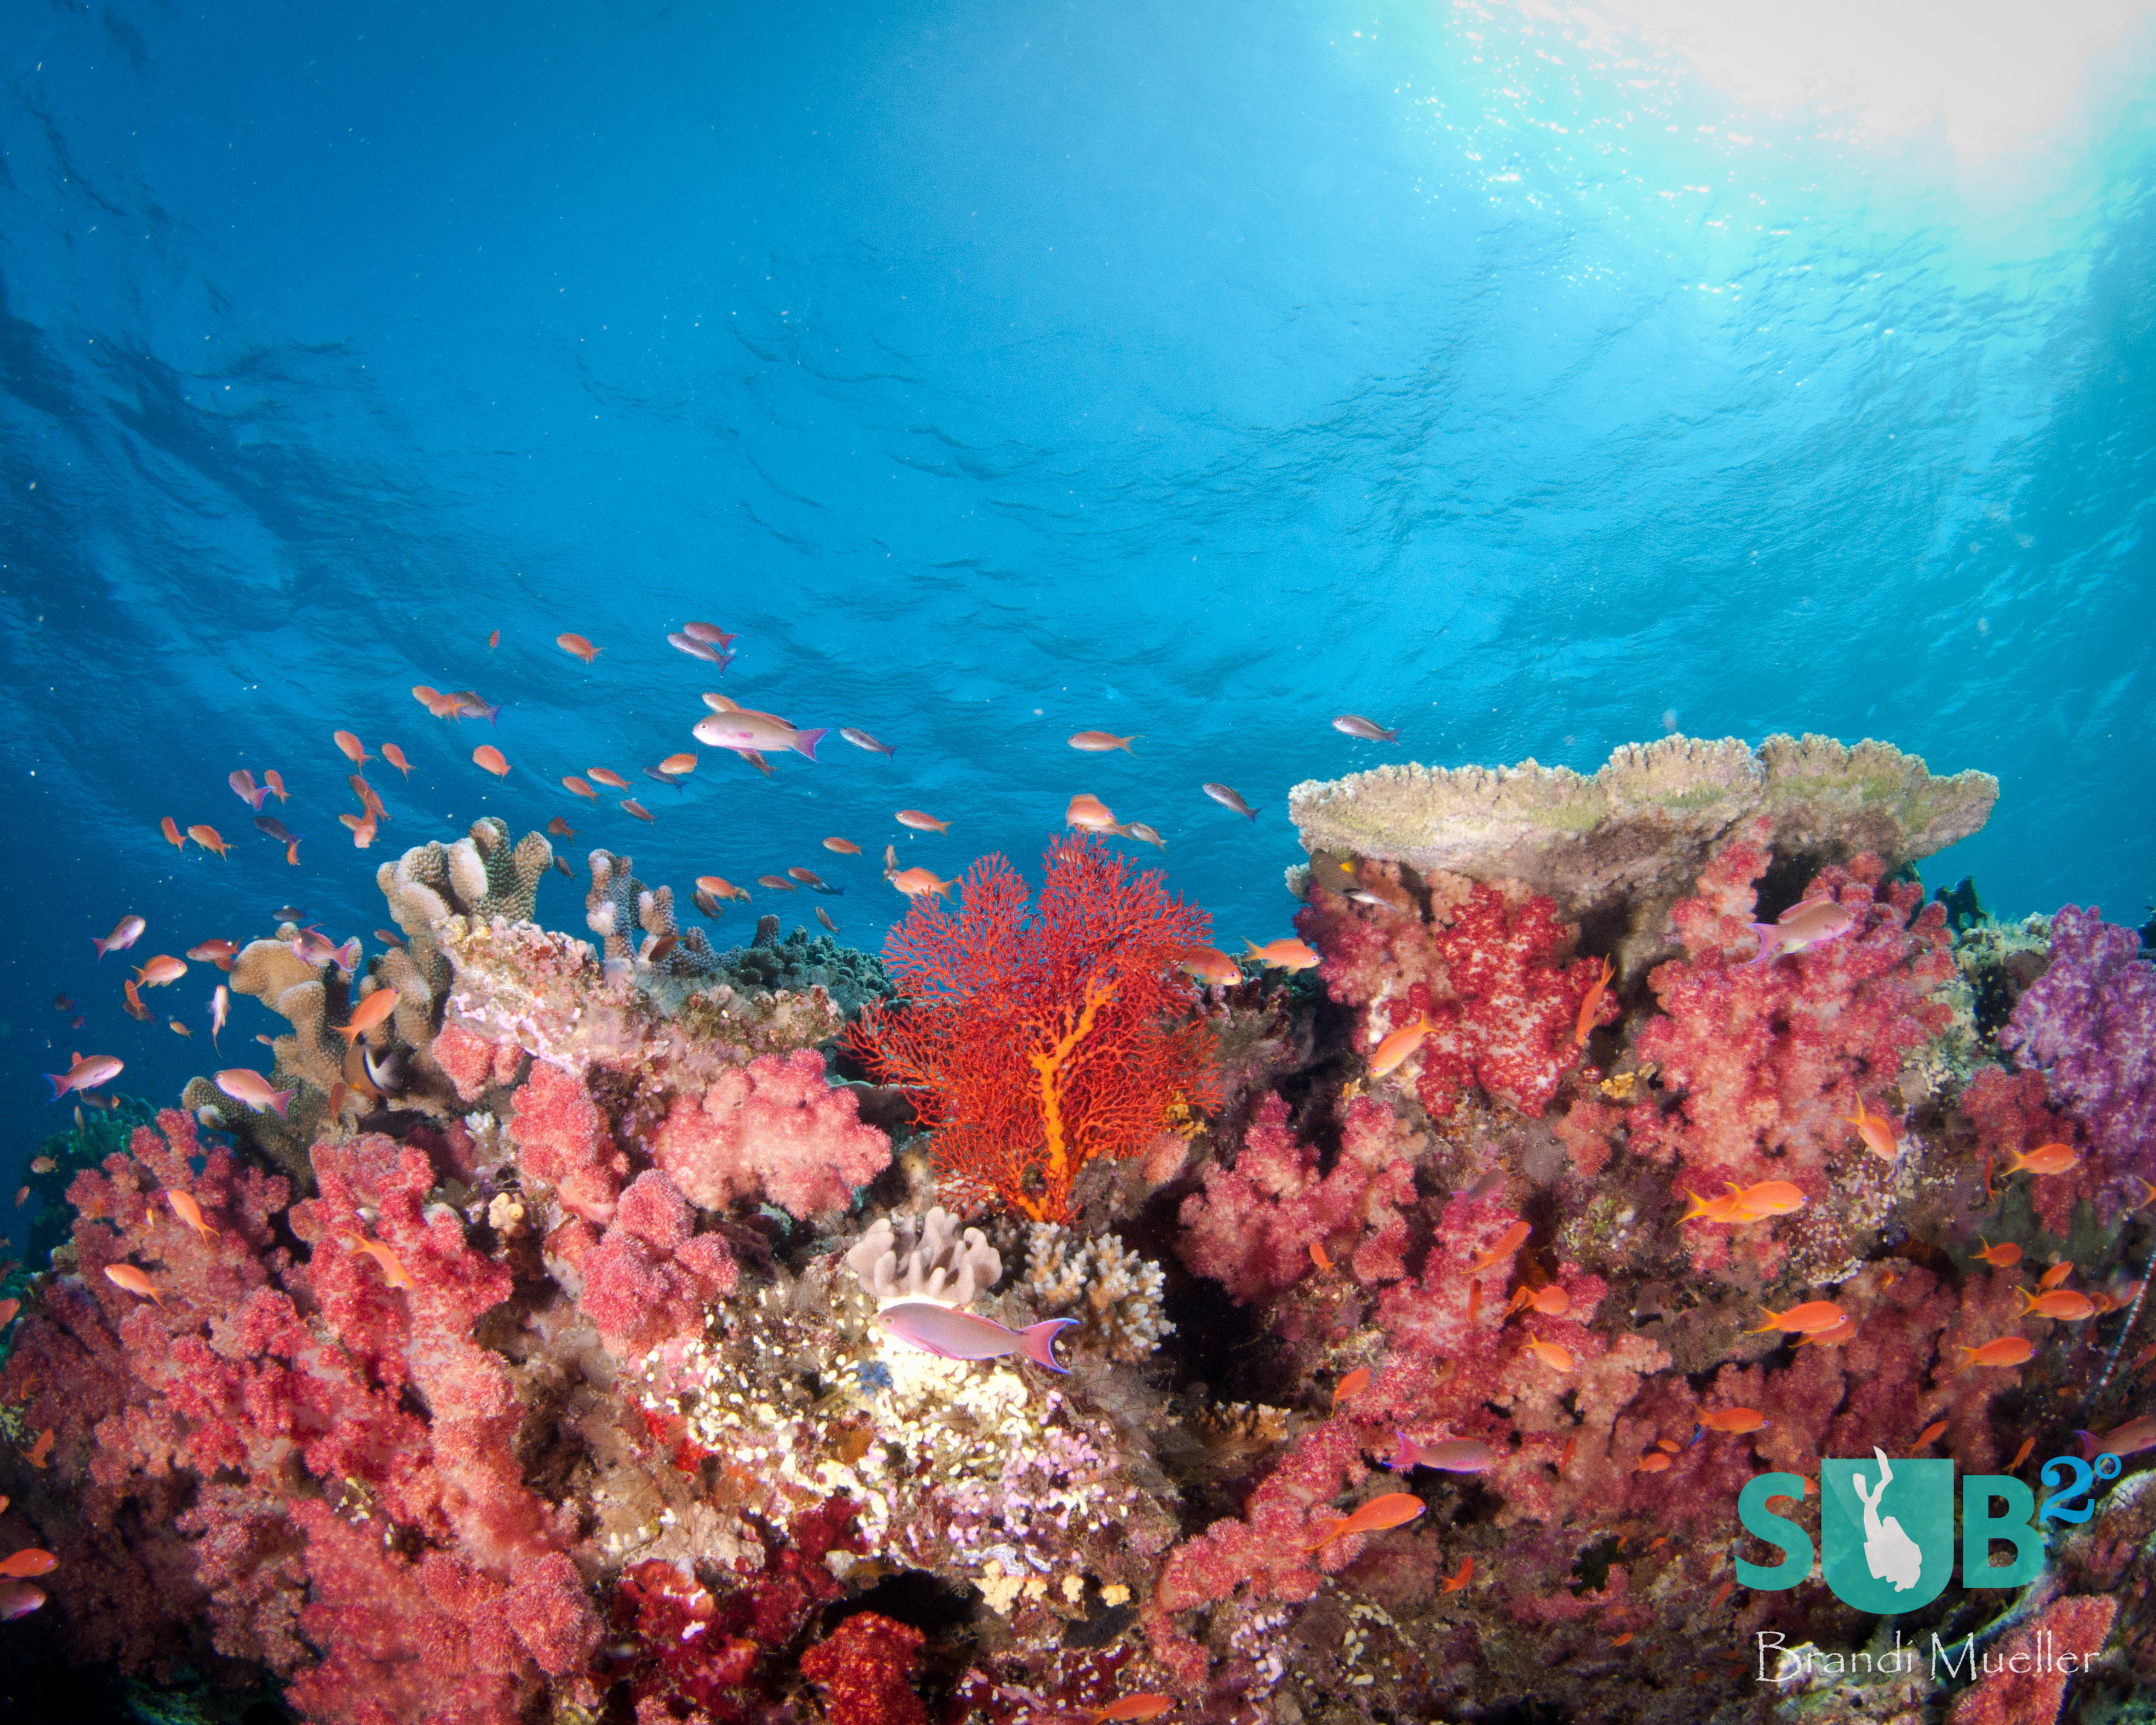 Fiji is known as the soft coral capital of the world.  Between the coral and the fish, the bright colors are endless!